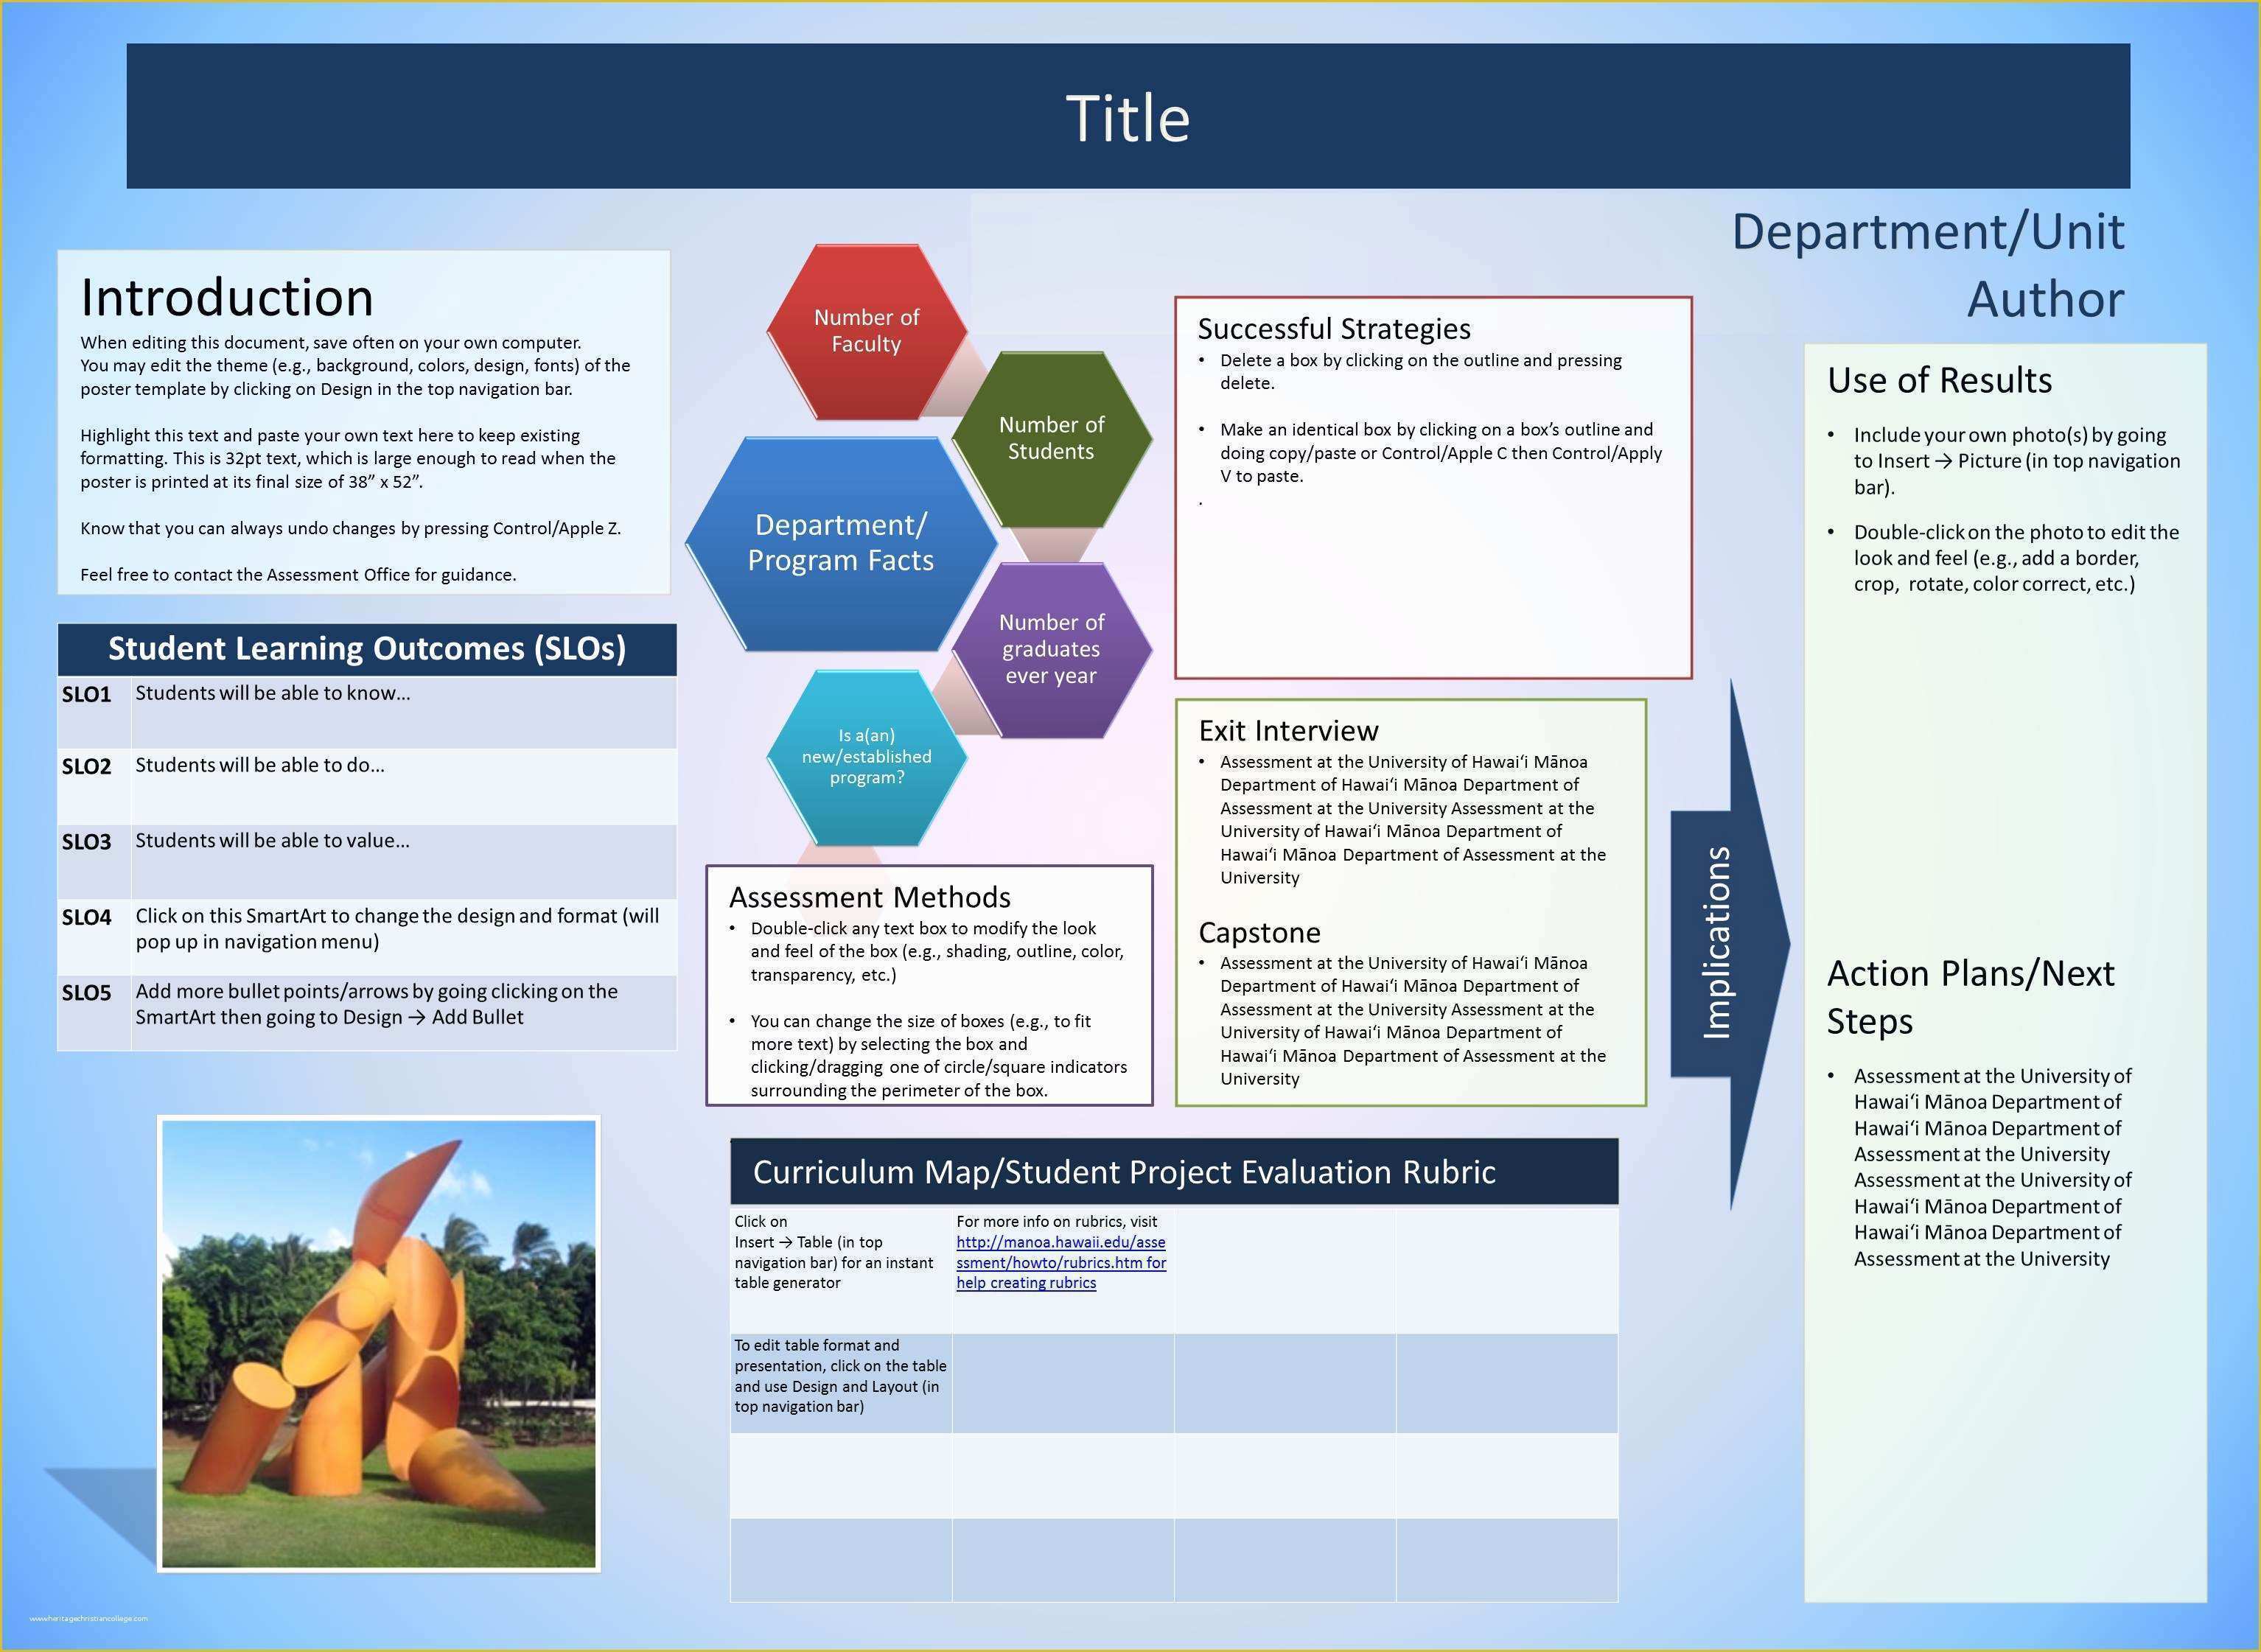 Poster Presentation Template Free Download Of University Of Hawaii at Manoa assessment Fice